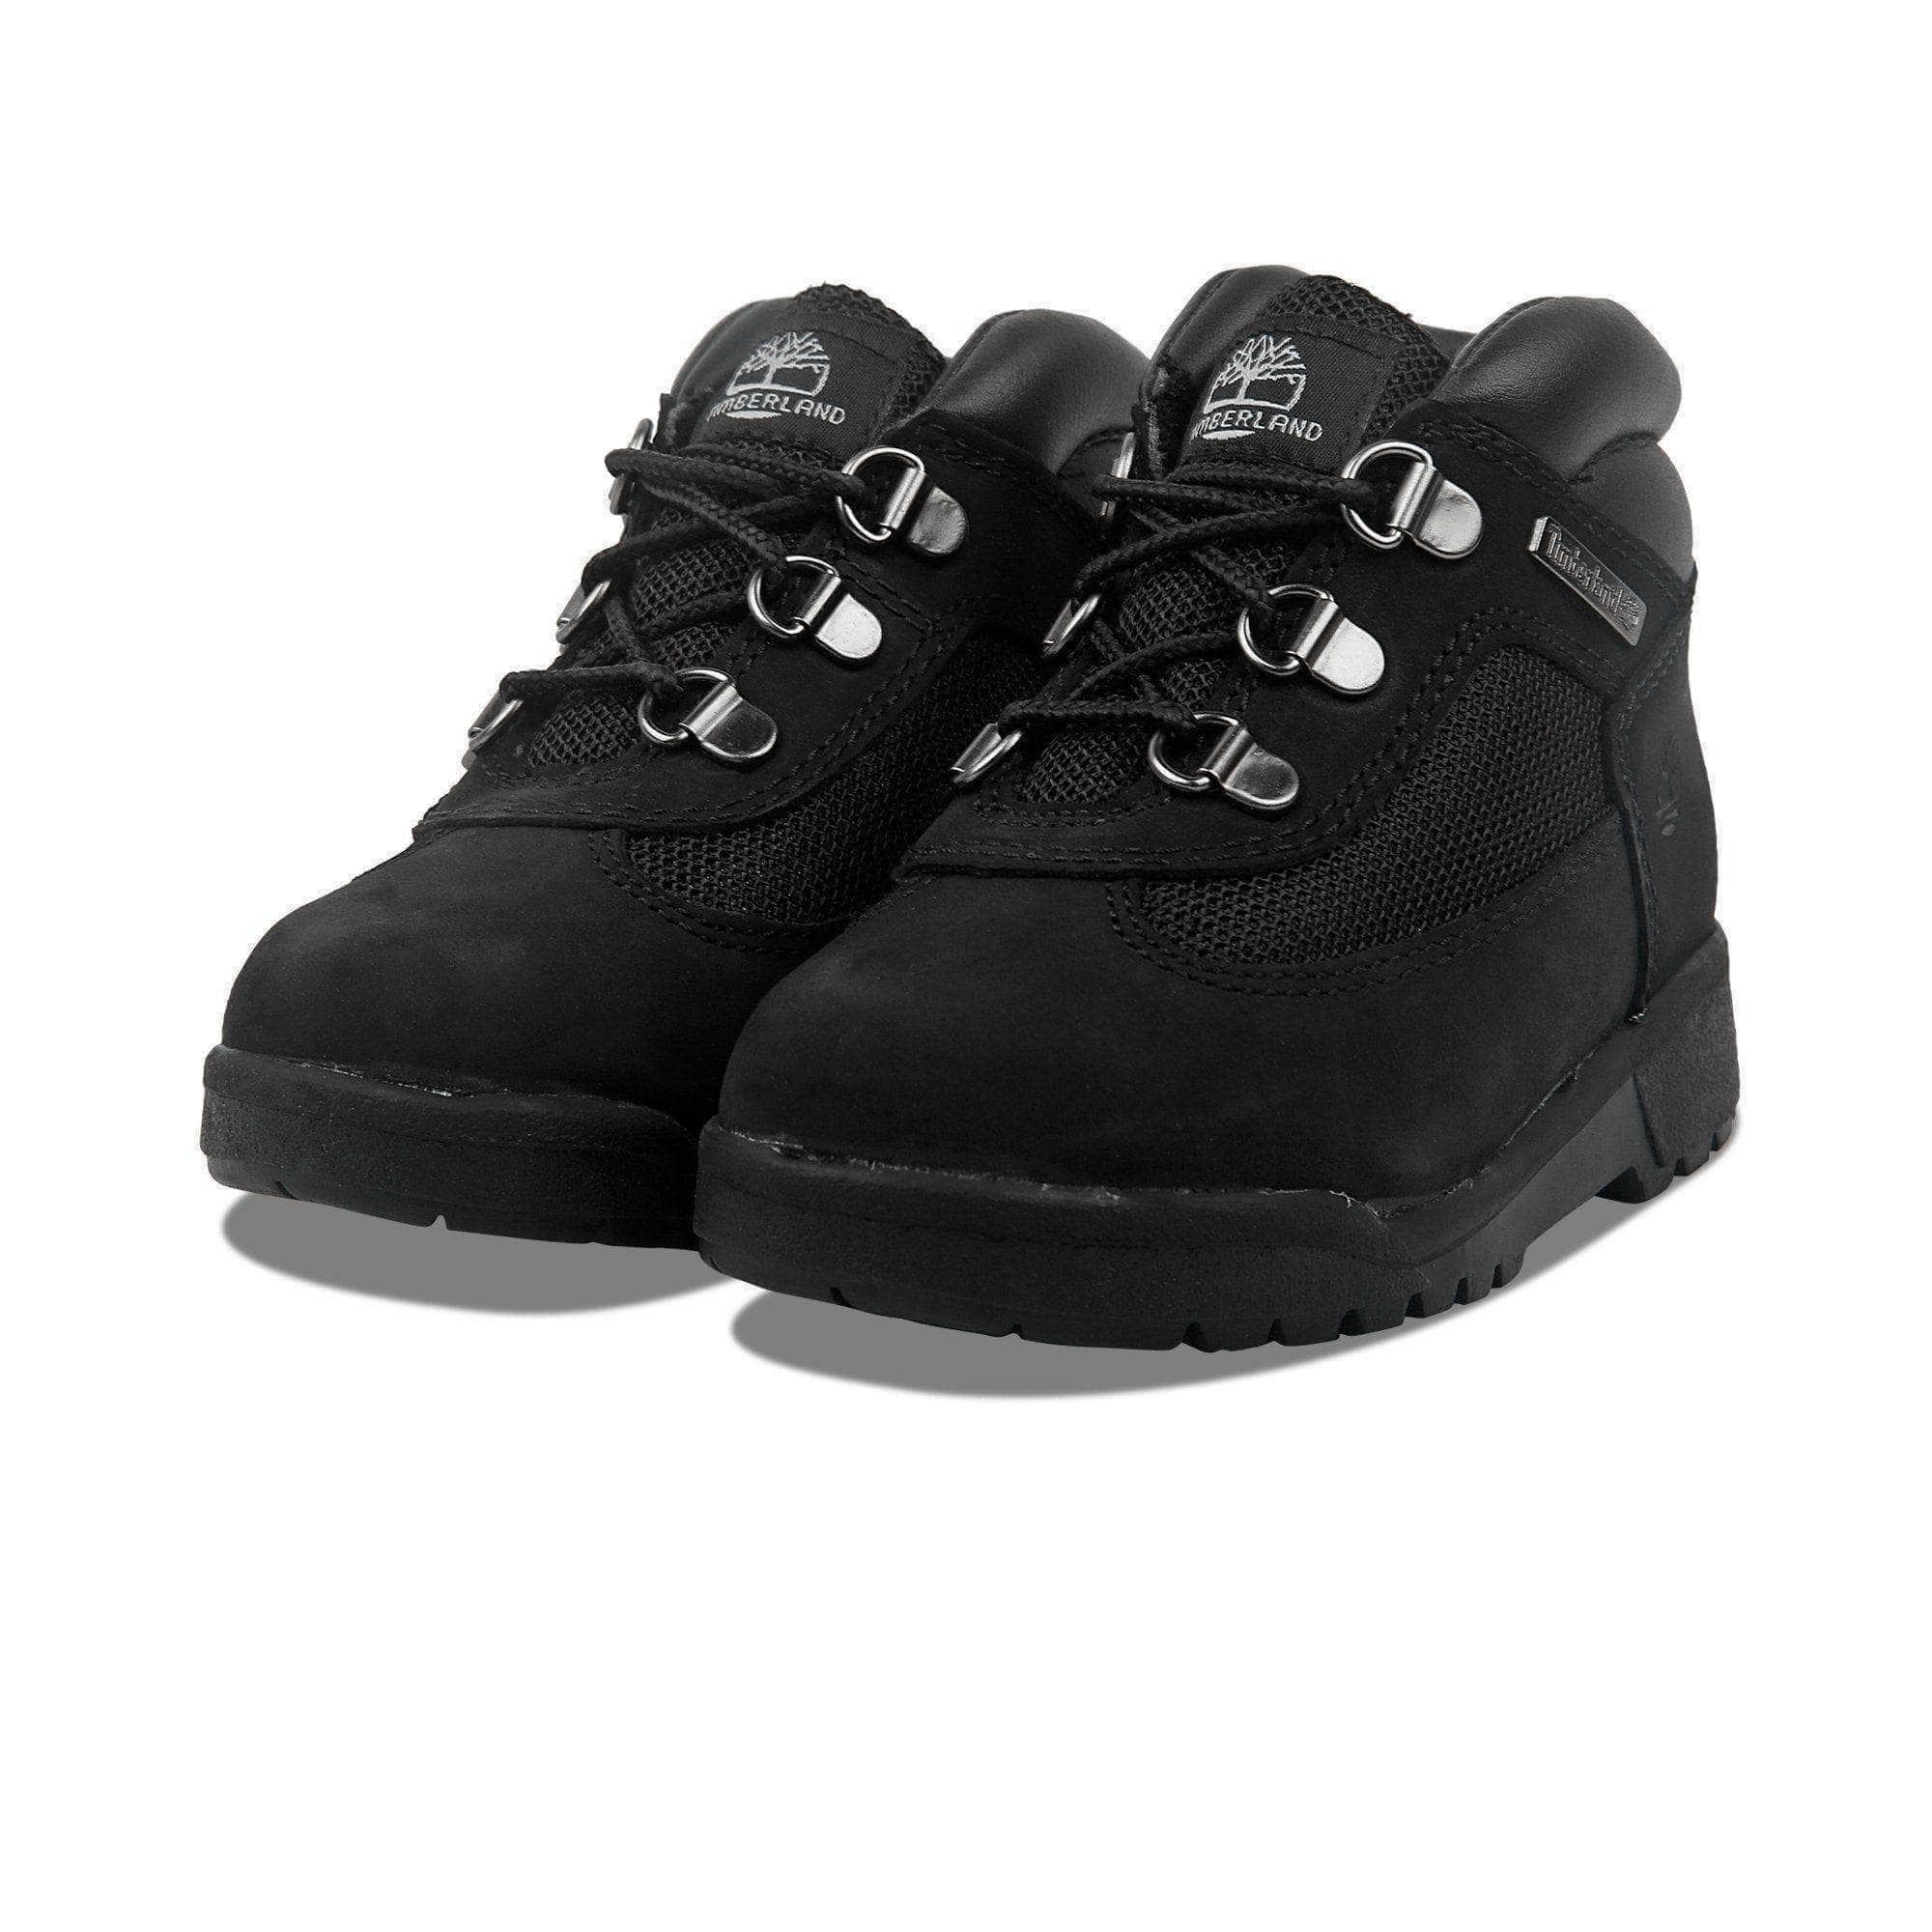 Timberland Scuff Proof Field Boot - Boy's Toddler